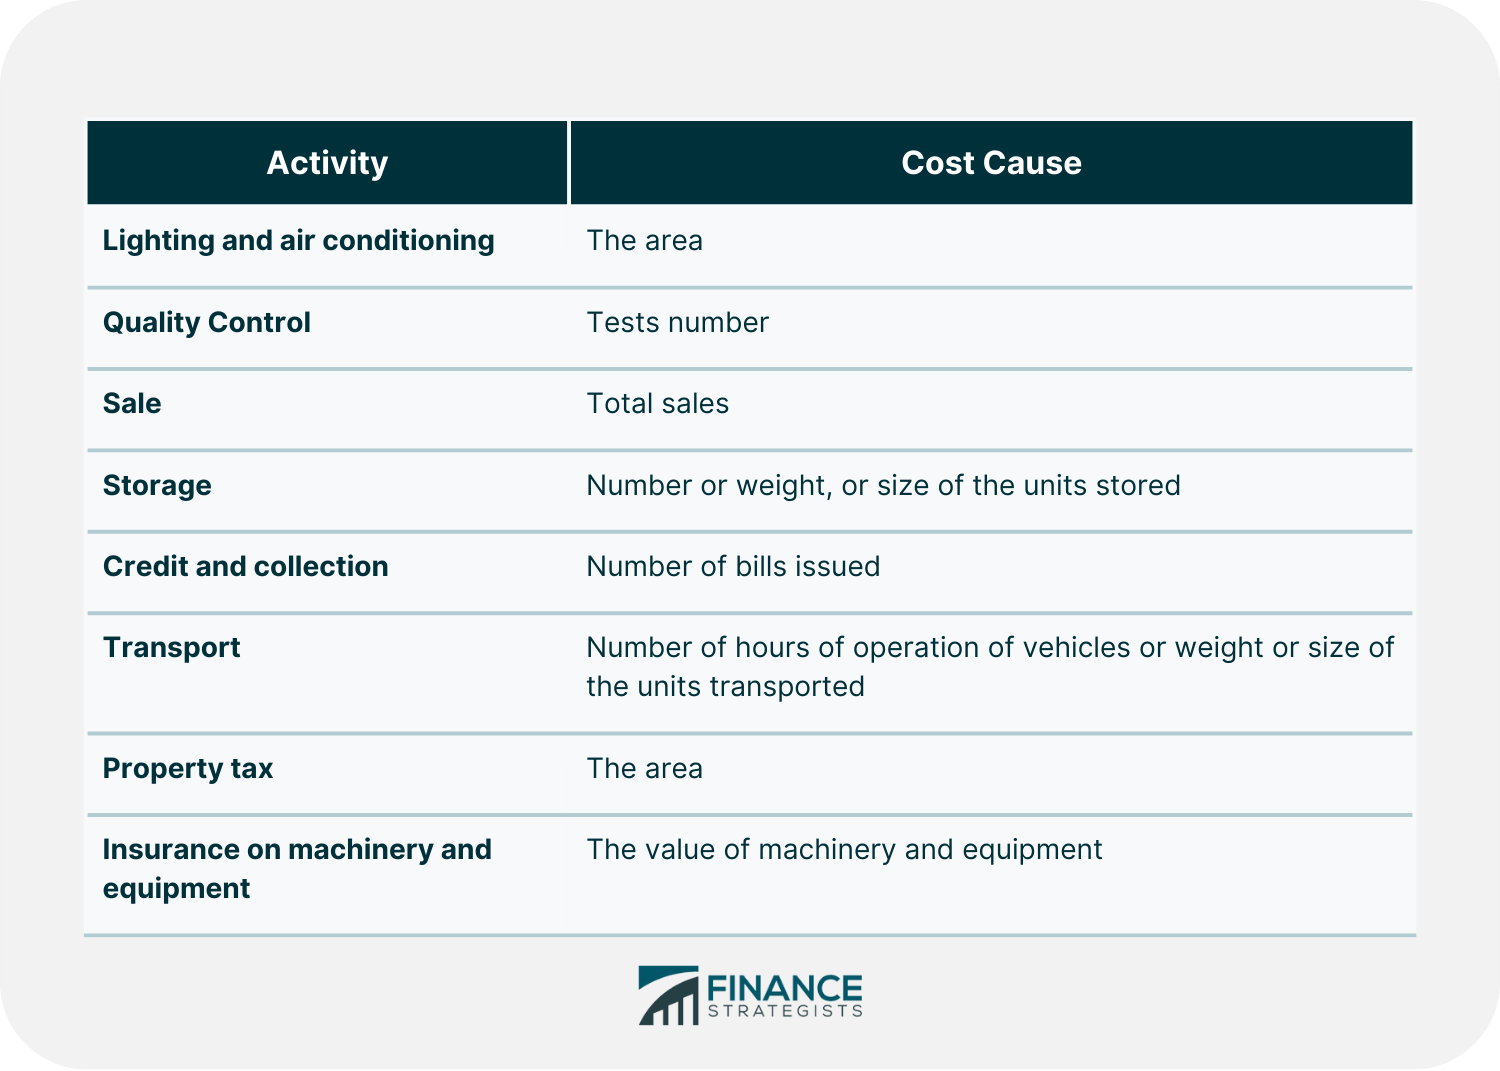 TABLE2-some examples of the causes of cost for some